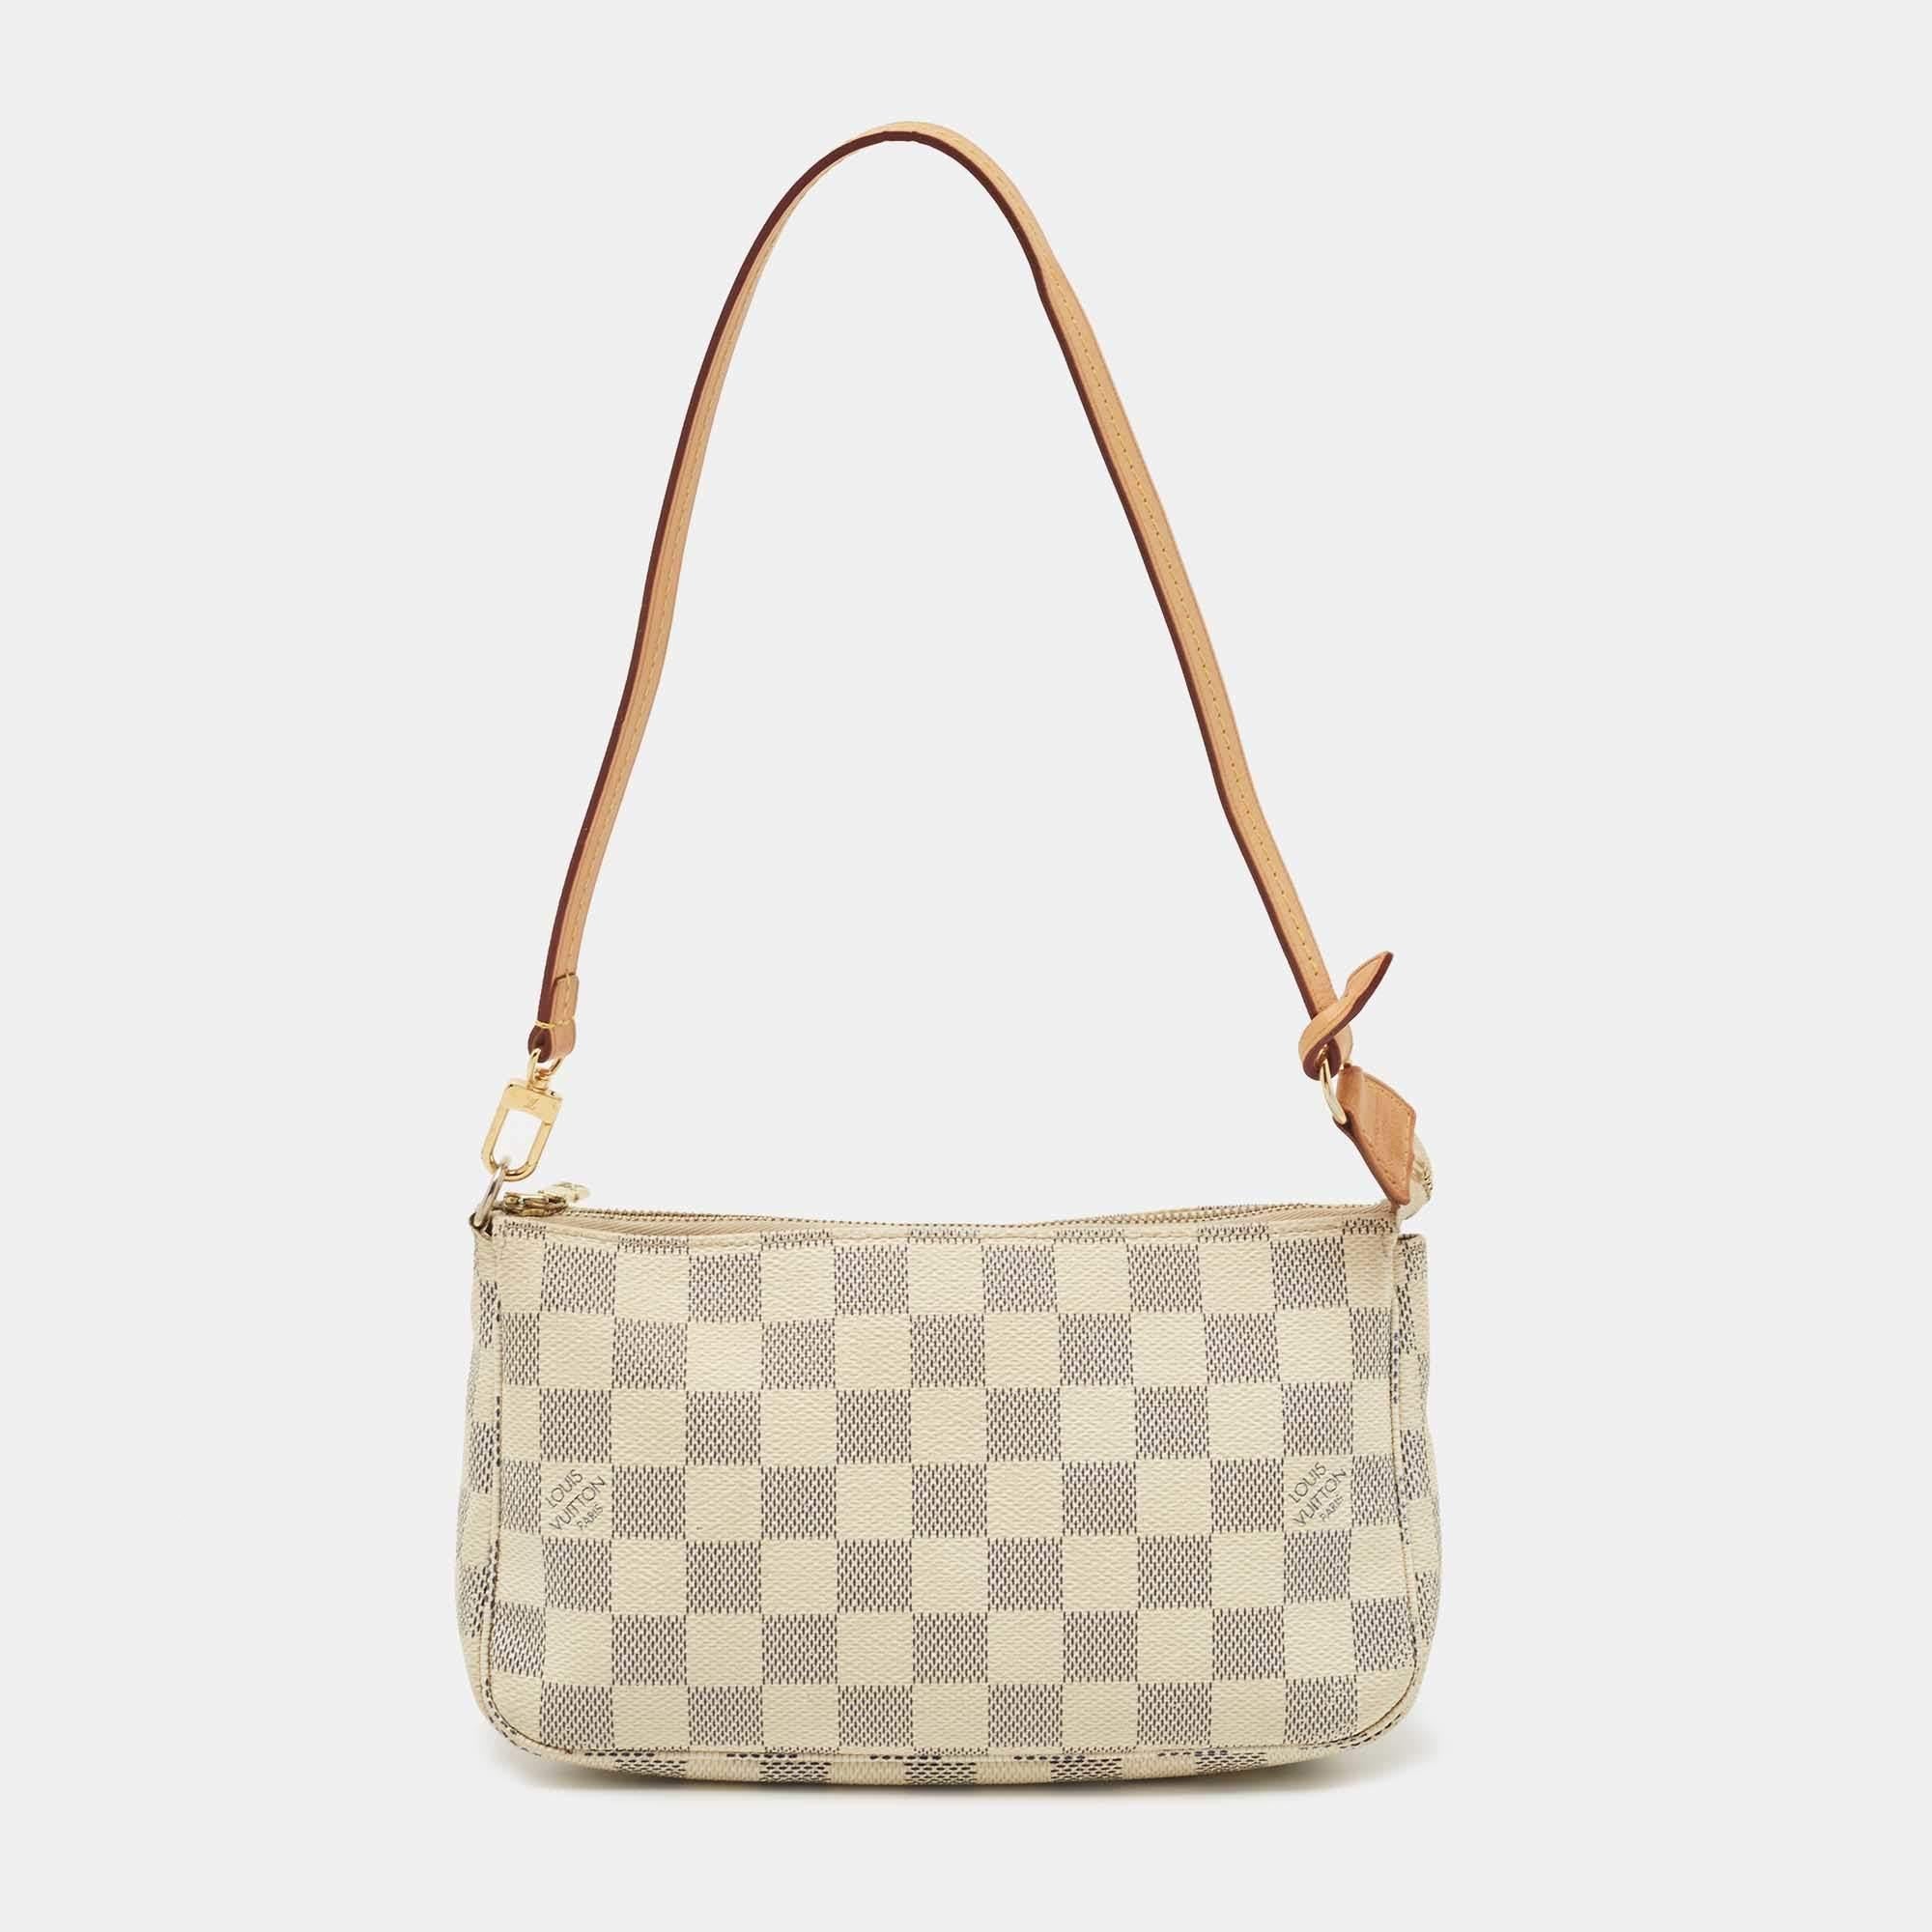 Louis Vuitton's handbags are popular owing to their high style and functionality. This bag, like all their designs, is durable and stylish. Exuding a fine finish, the bag is designed to give a luxurious experience.

Includes: Original Dustbag
